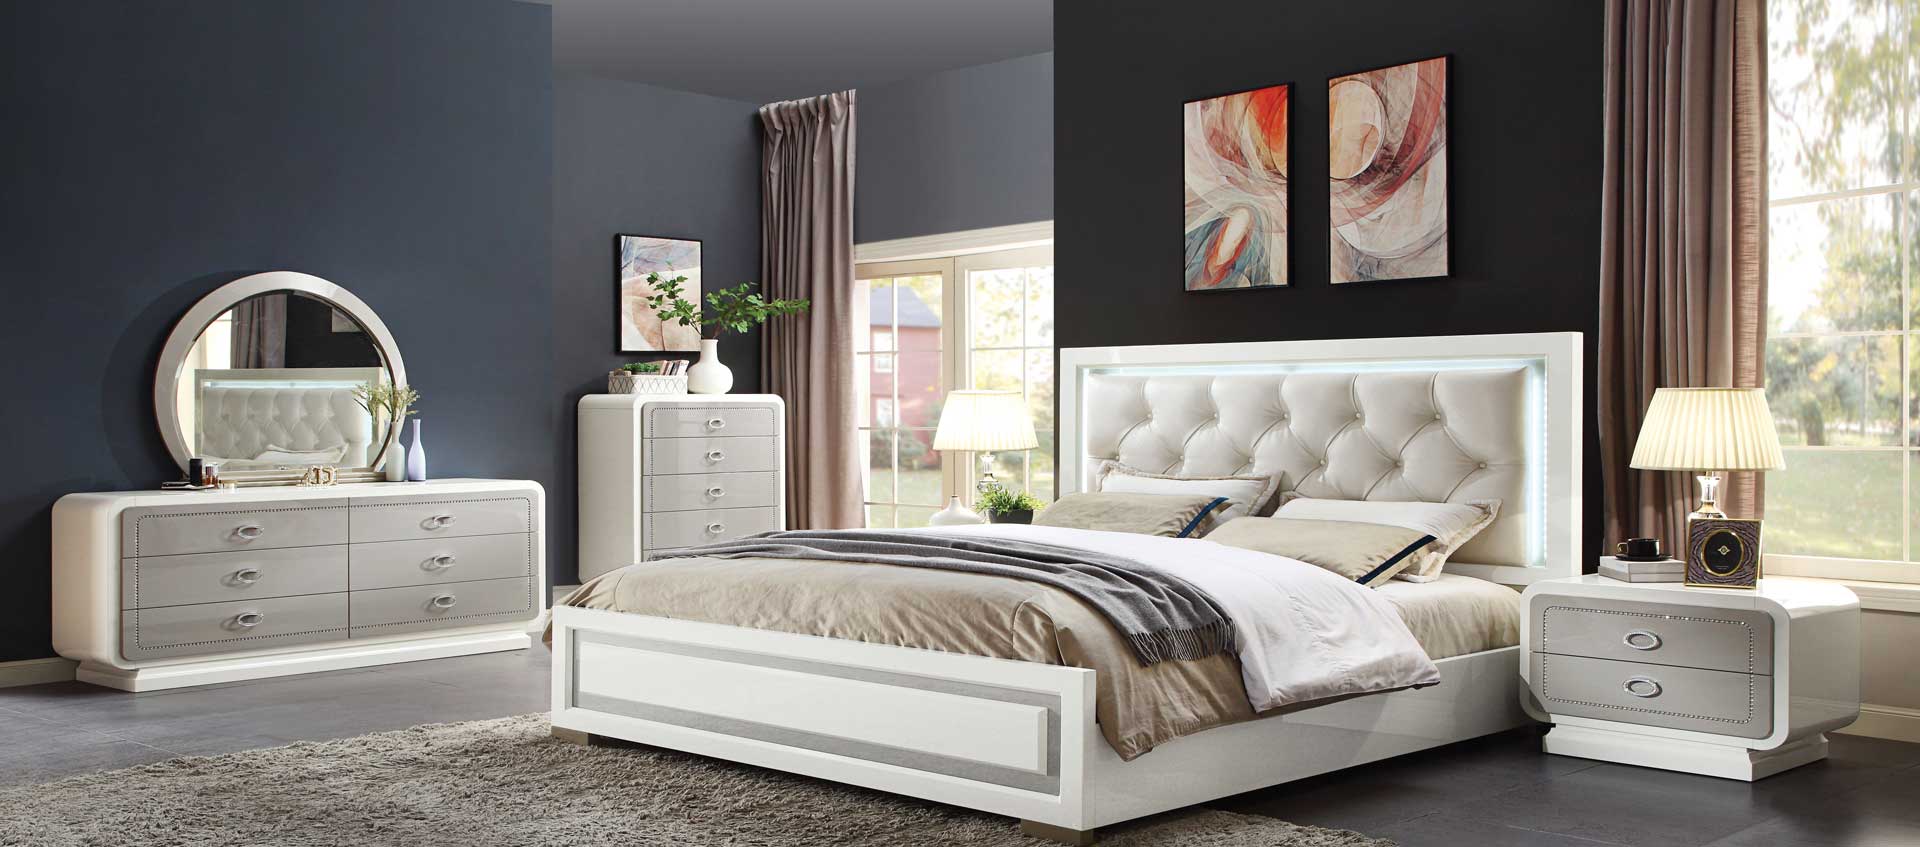 bedroom furniture stores vancouver